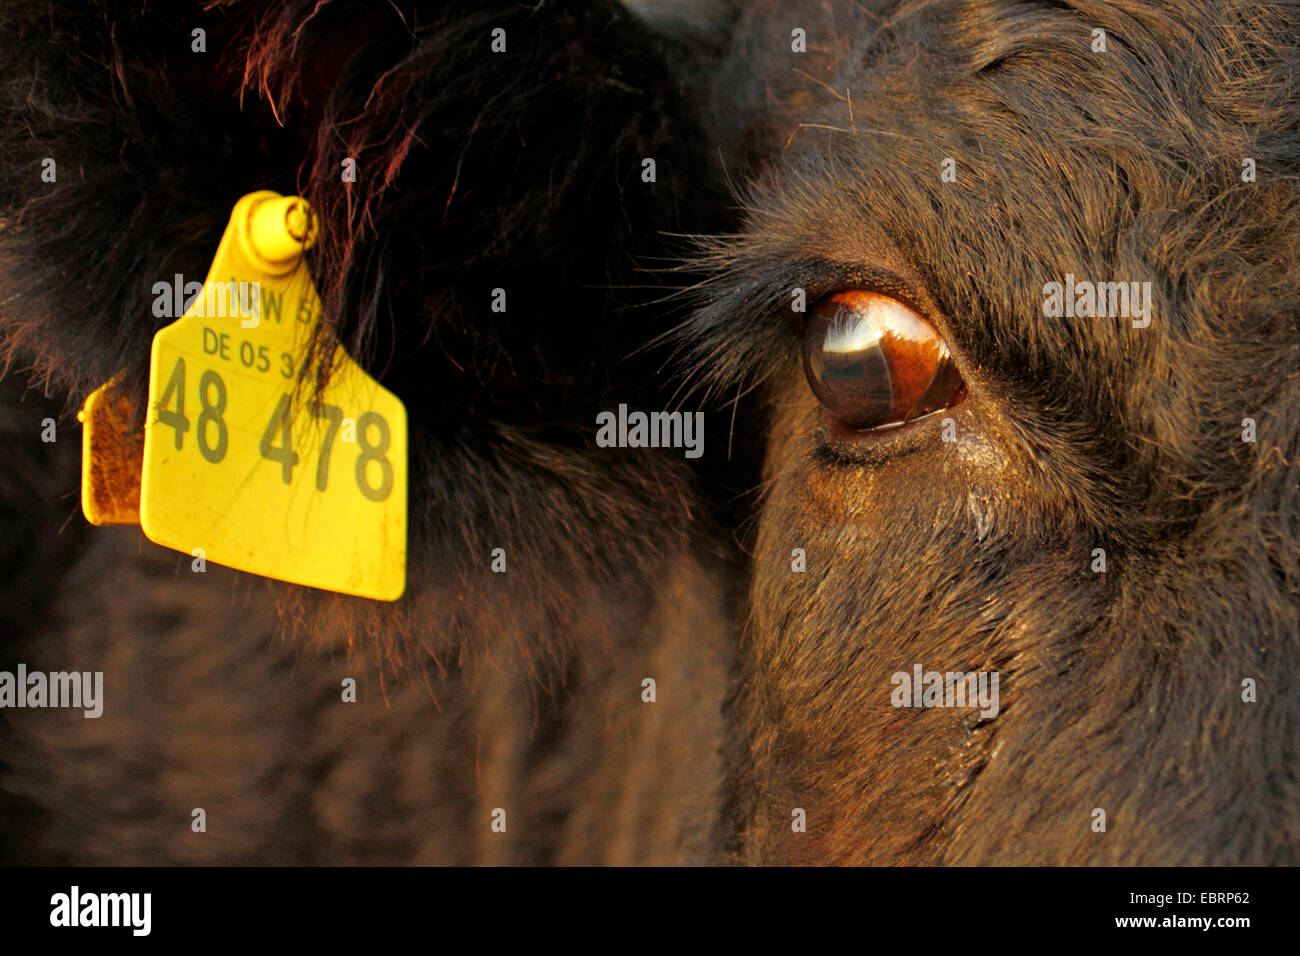 domestic cattle (Bos primigenius f. taurus), closeup of eye and yellow ear tag for official identification of cattle, Germany, North Rhine-Westphalia Stock Photo